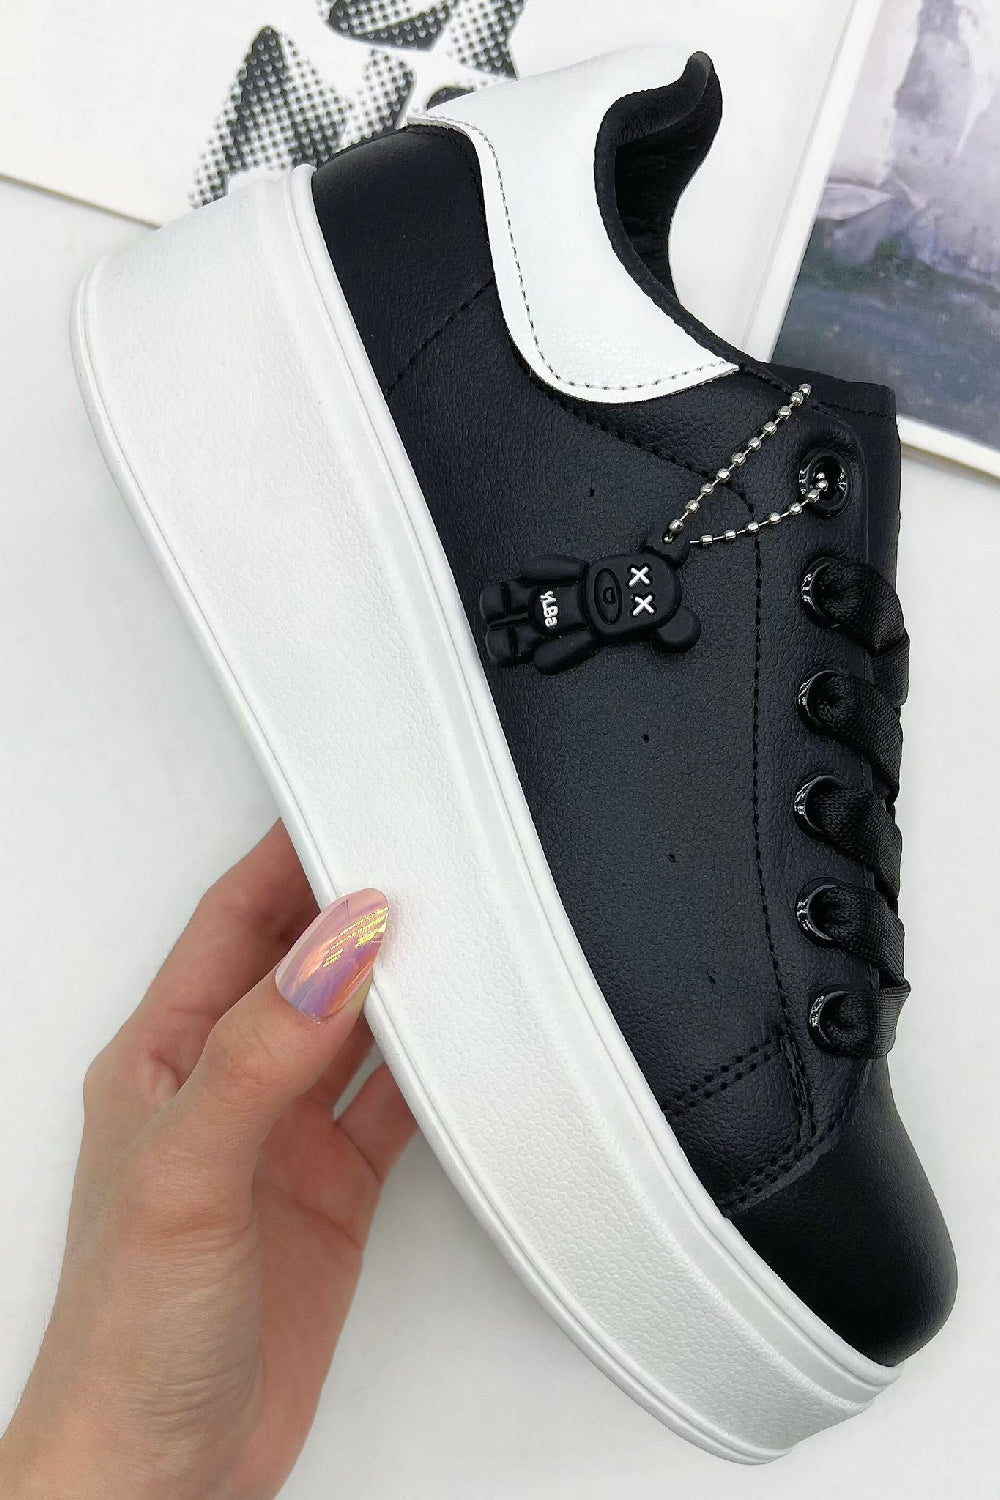 BLACK LACE UP TAB DETAIL CHUNKY FLAT SNEAKERS TRAINERS